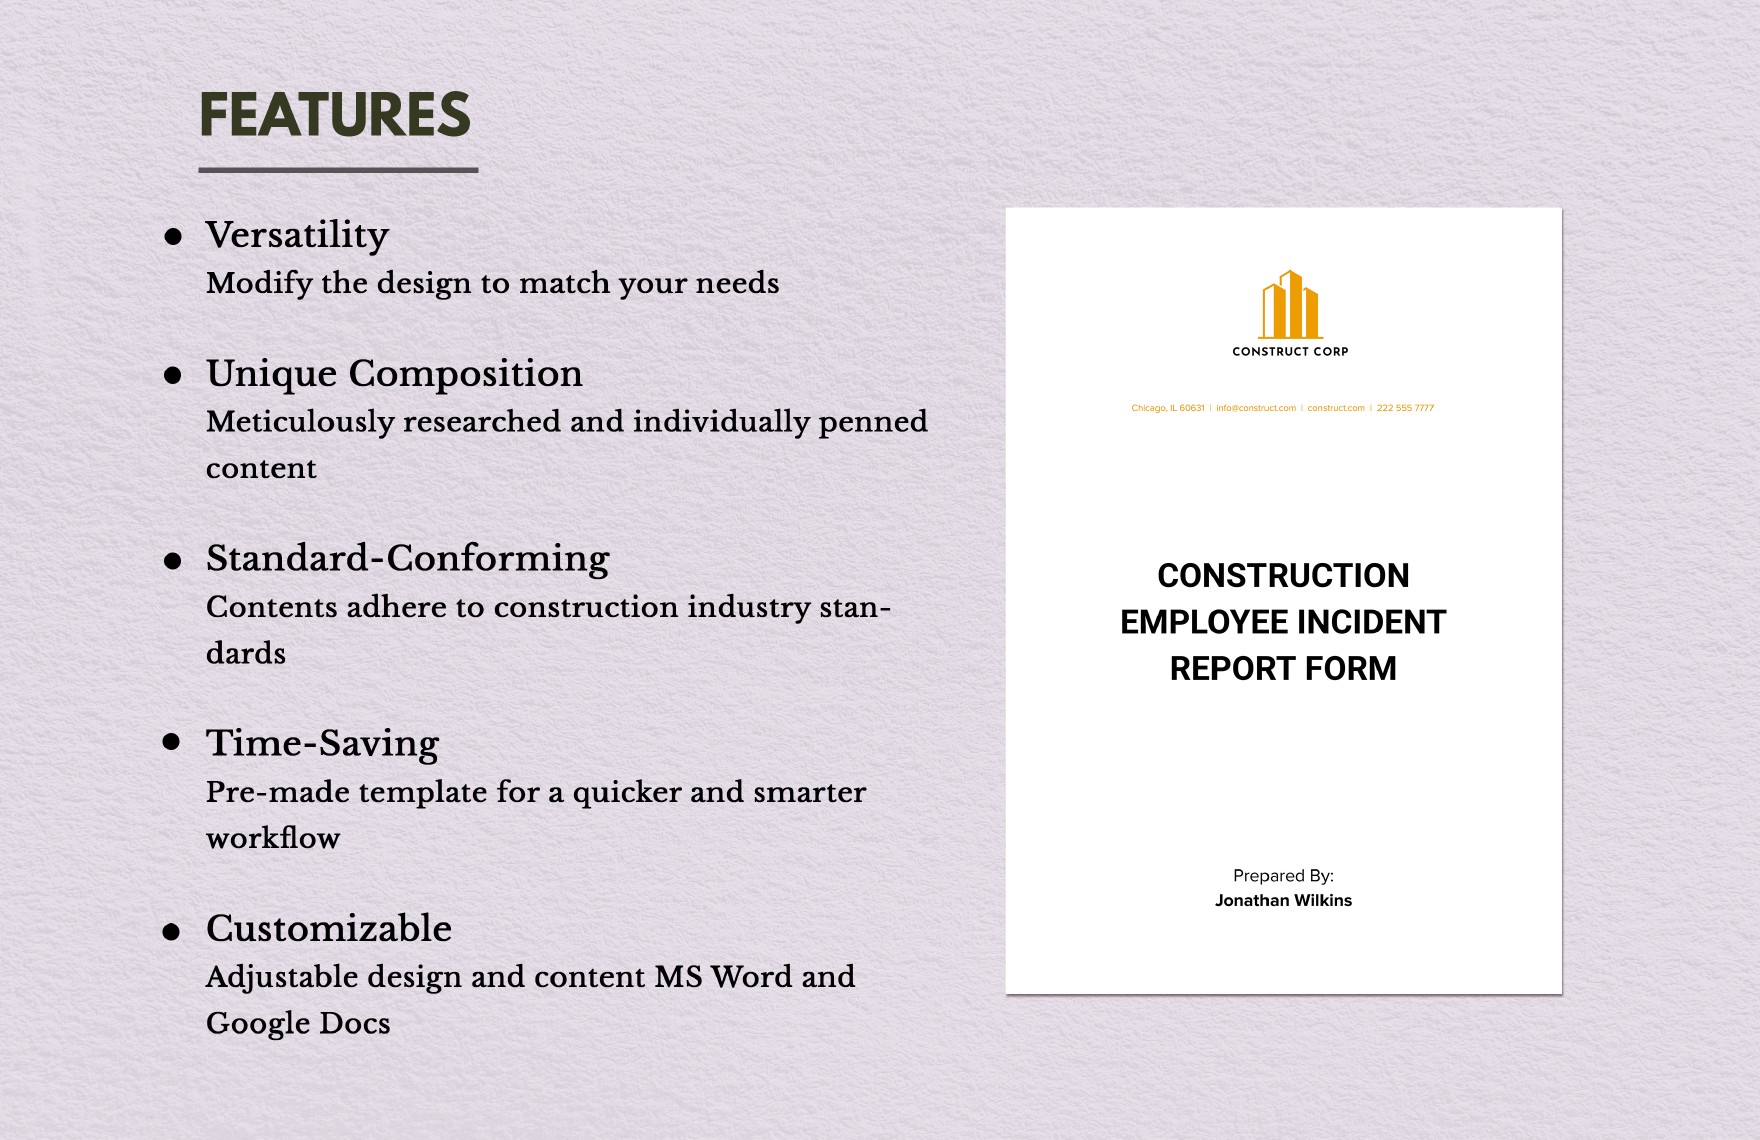 Construction Employee Incident Report Form 